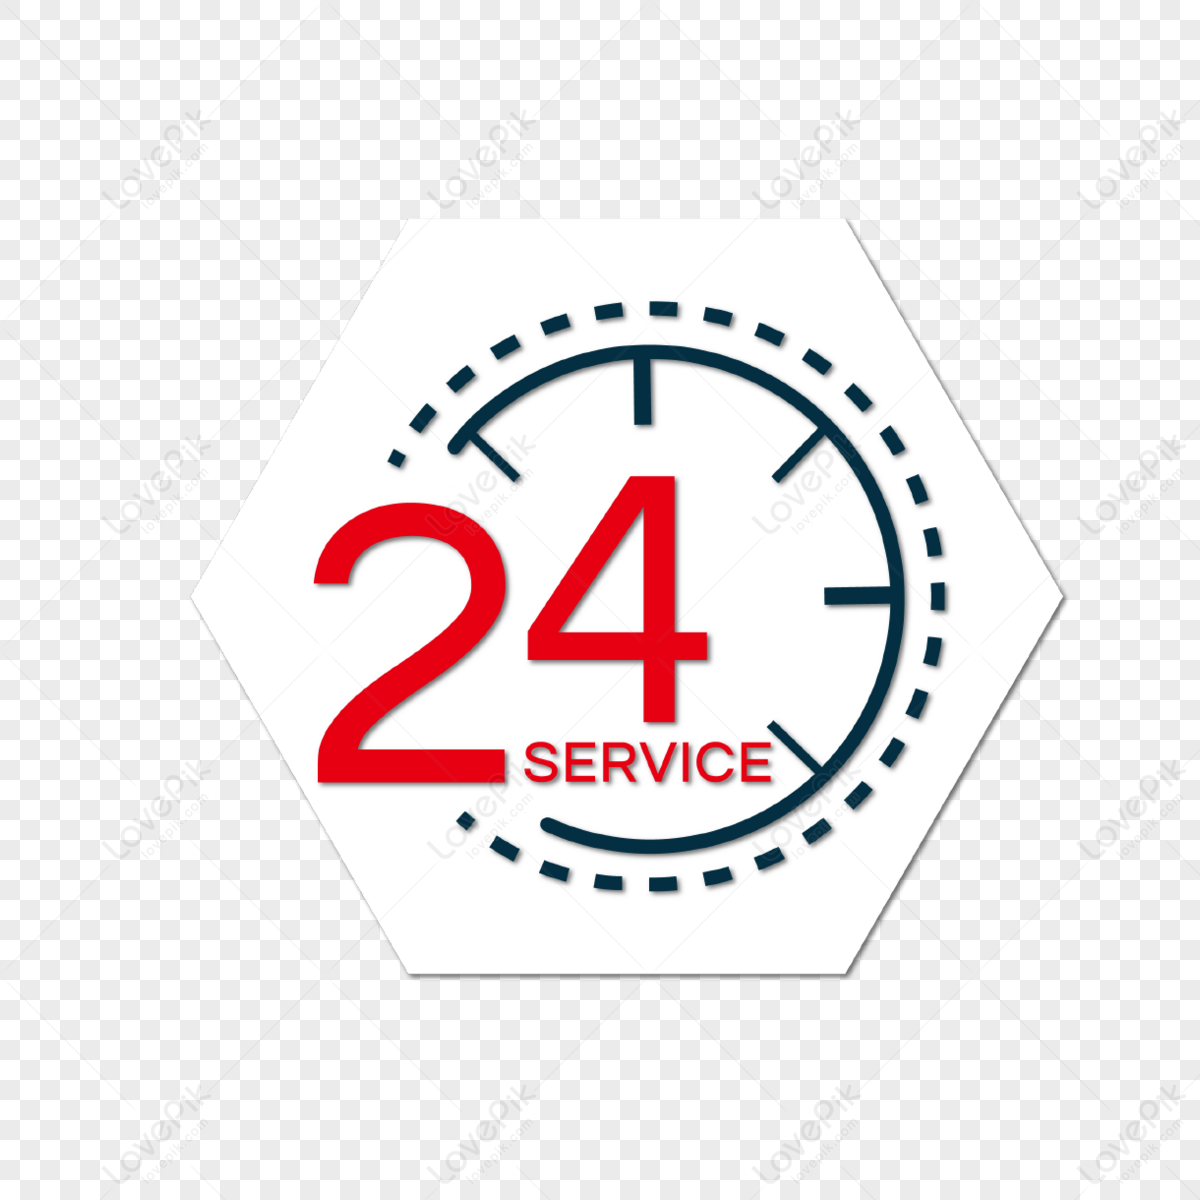 24 Hour Service Vector Art, Icons, and Graphics for Free Download